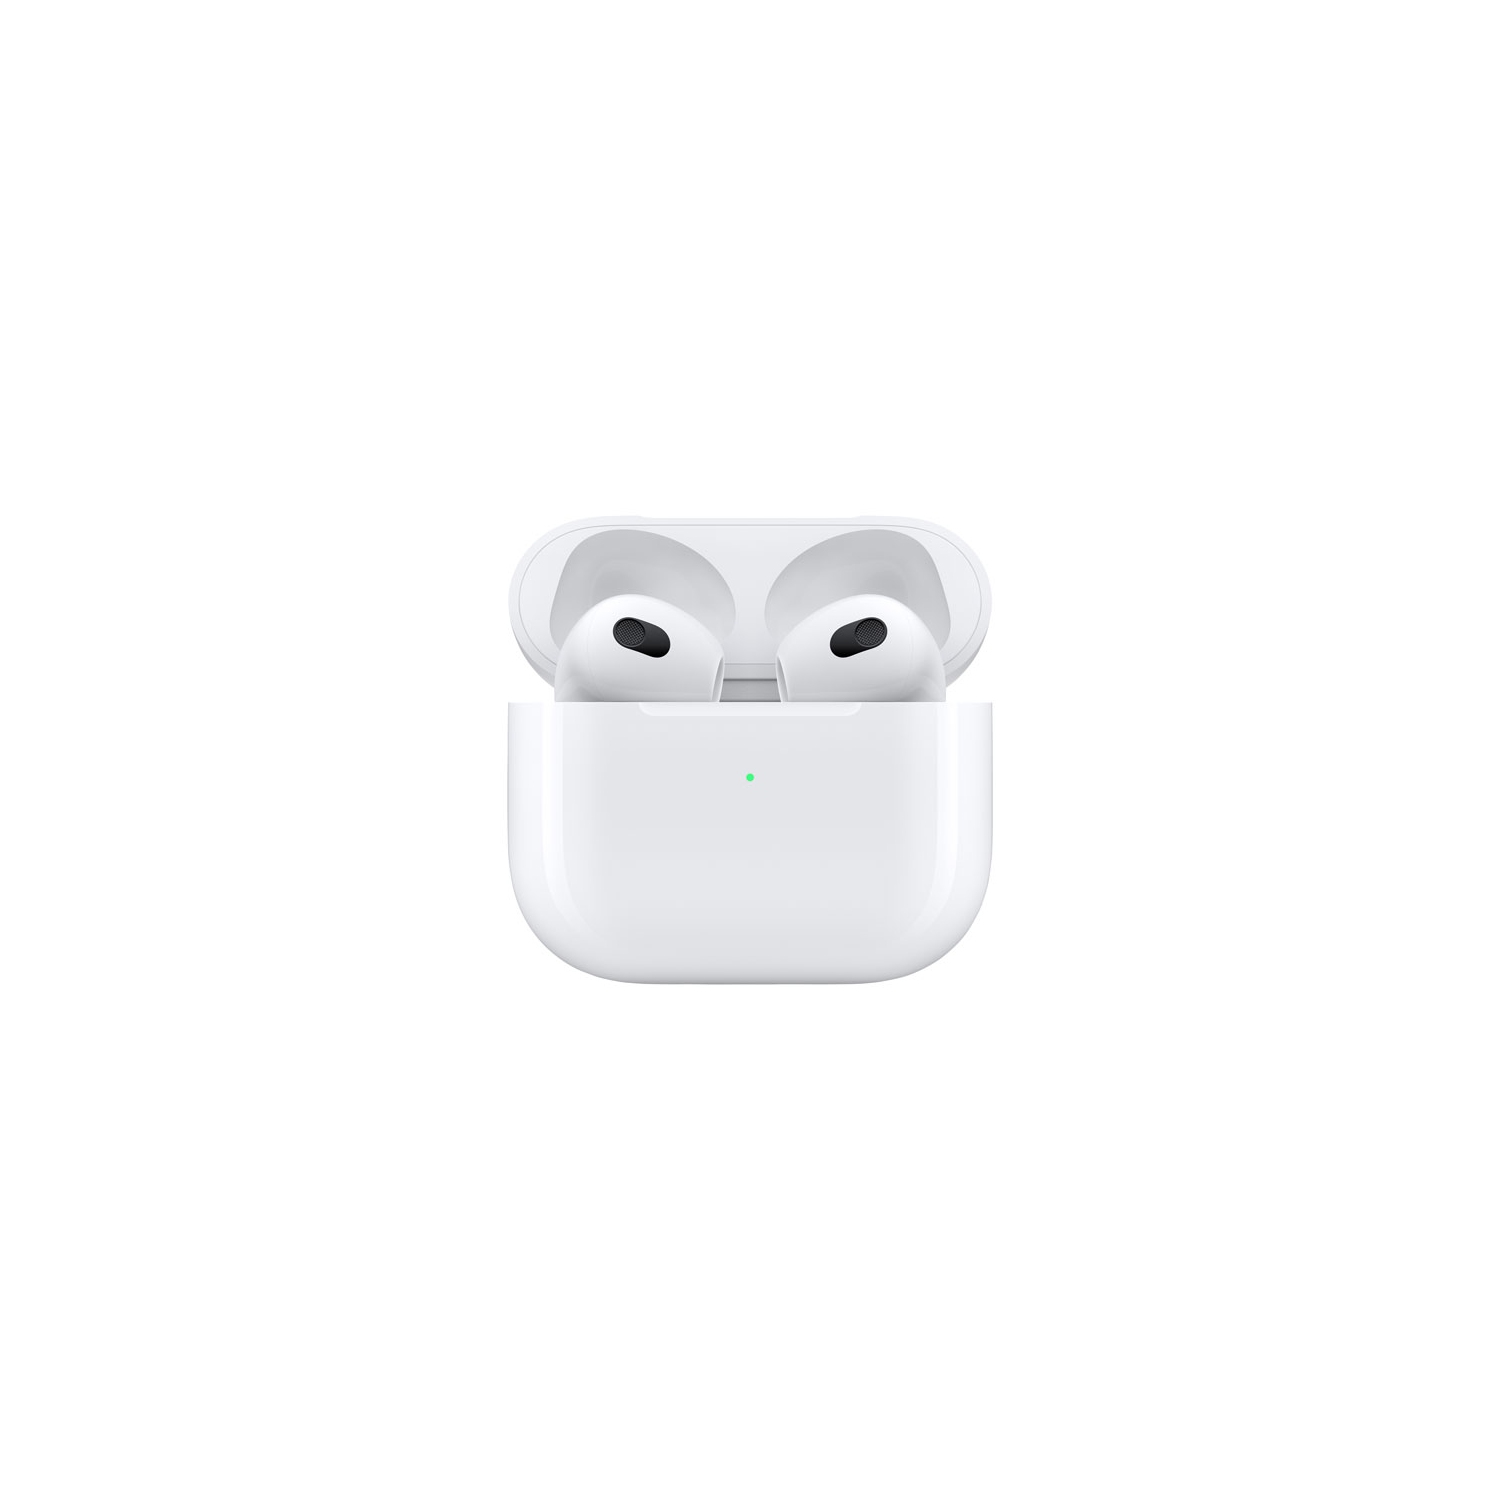 Refurbished (Good) - Apple AirPods In-Ear True Wireless Earbuds (3rd Generation) with MagSafe Charging Case - White